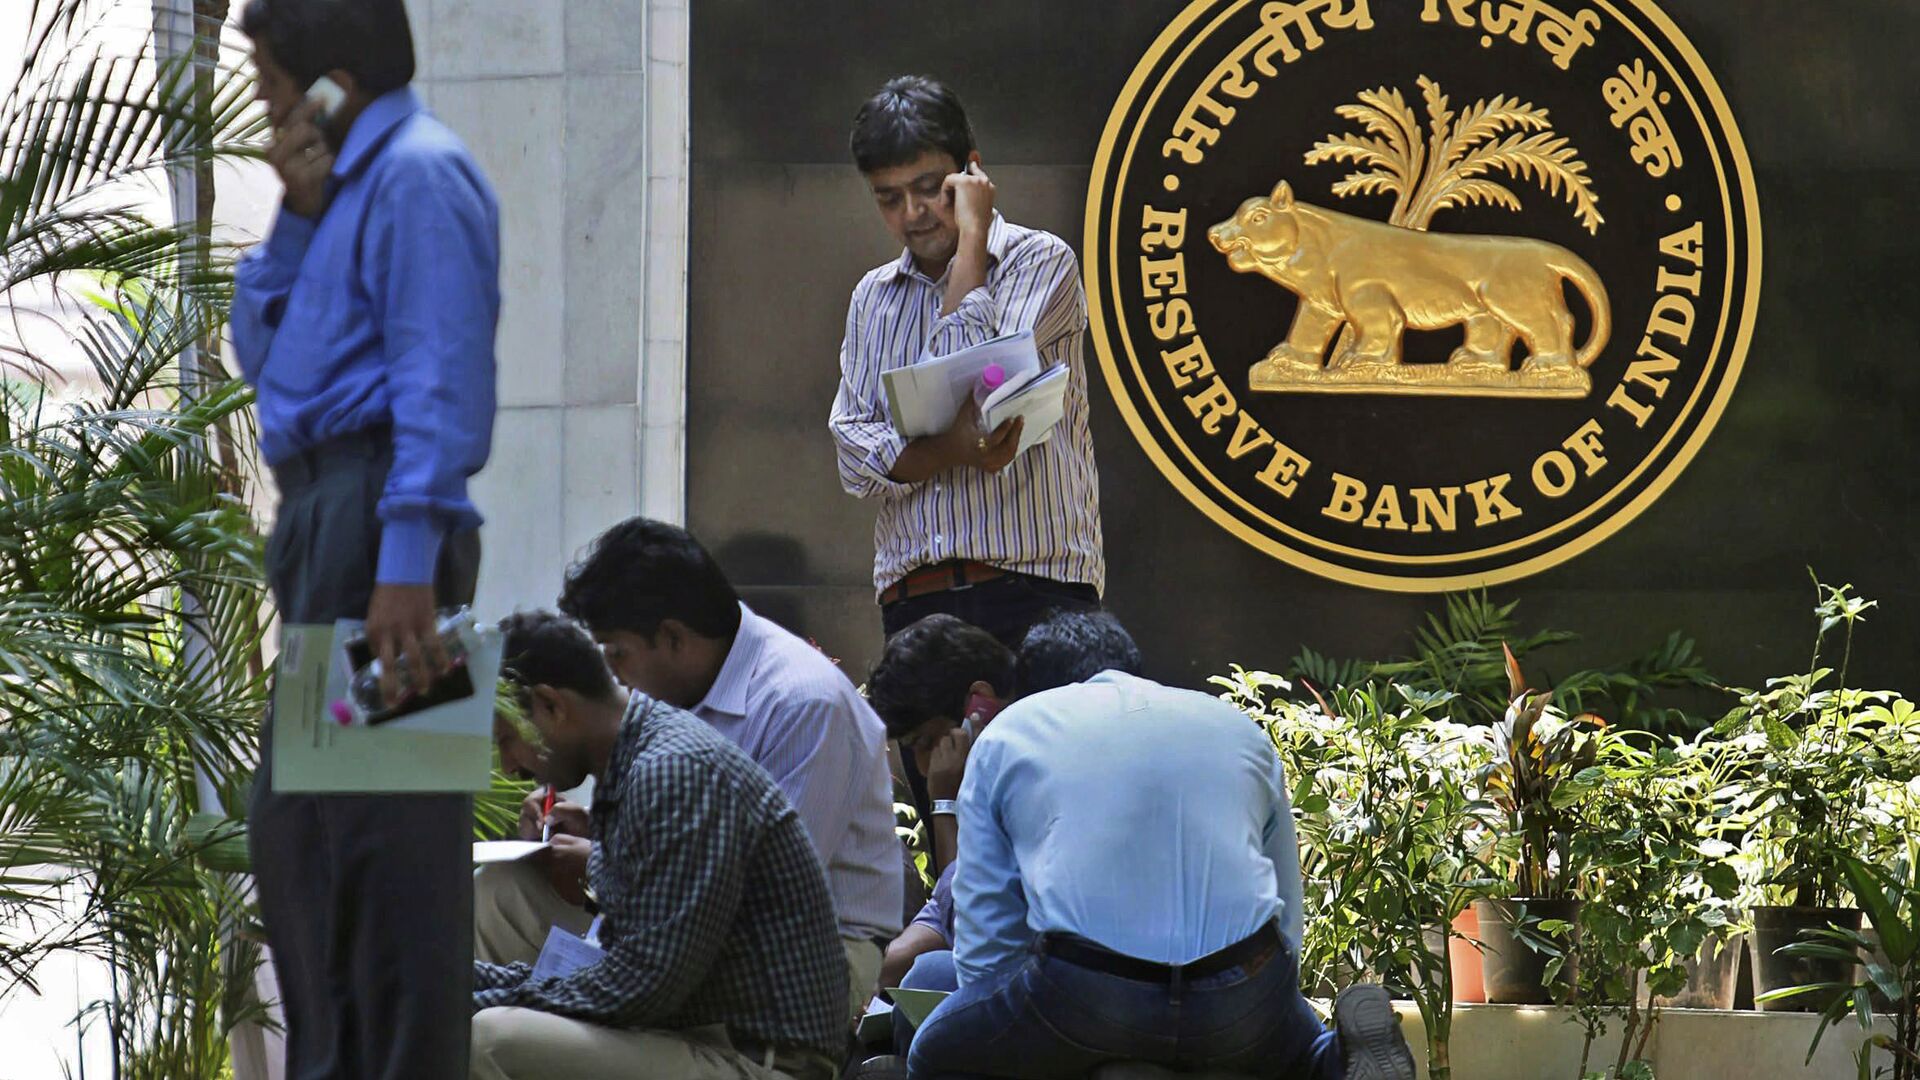 Journalists wait next to the logo of the Reserve Bank of India (RBI), outside its head office in Mumbai, India, Tuesday, April 20, 2010 - Sputnik International, 1920, 27.05.2022